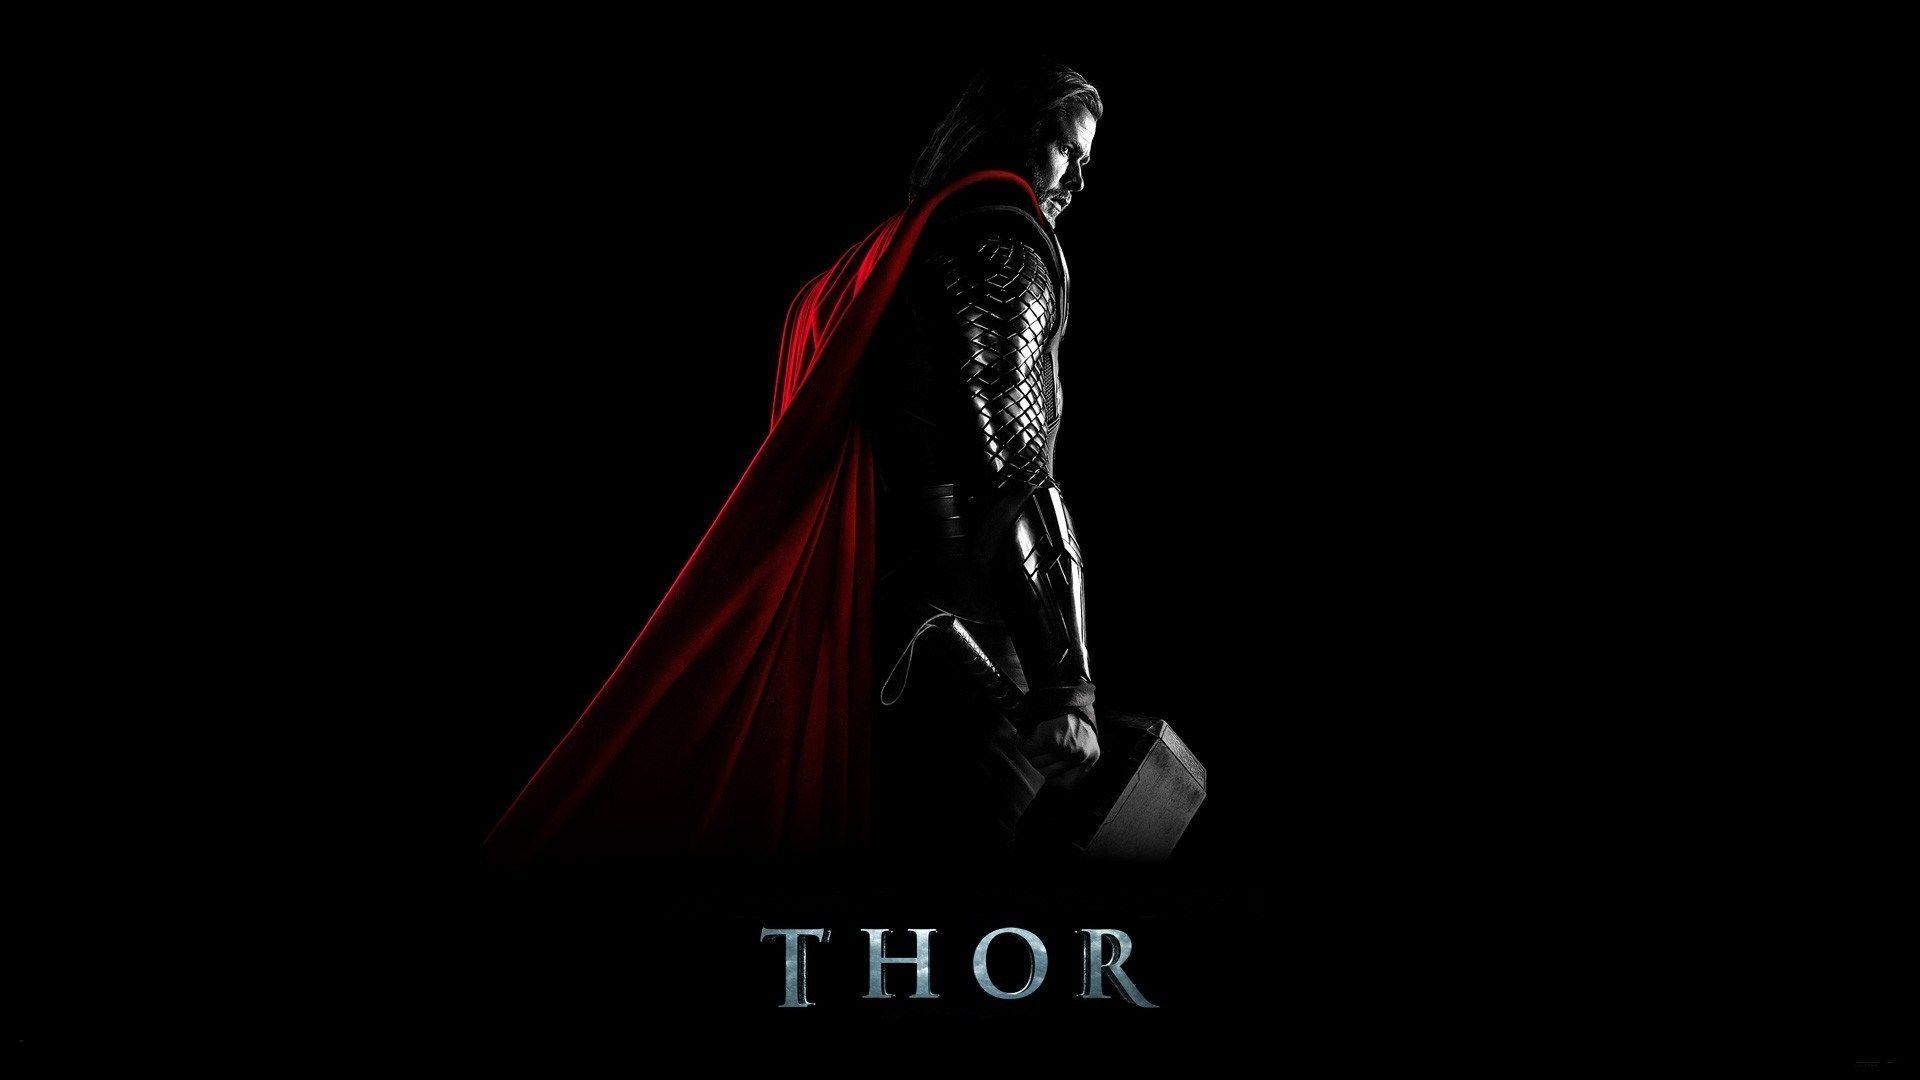 High Quality thor wallpaper (Jaylee Leapman 1920x1080)